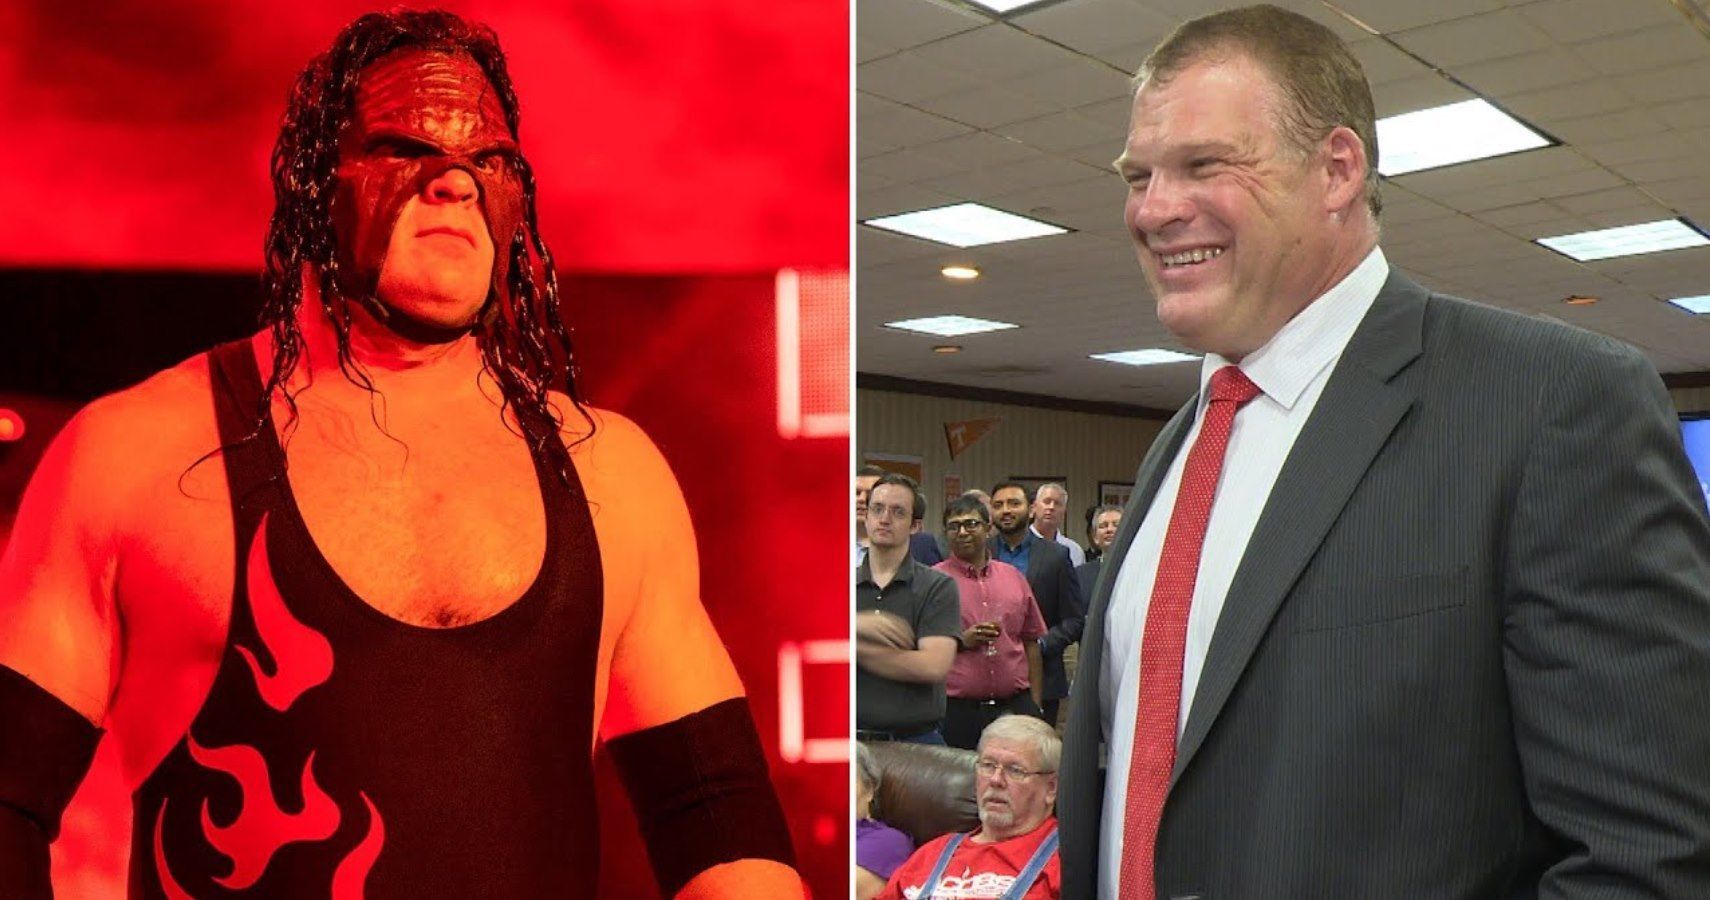 Kane signed Big Red Machine - For the Love of Wrestling